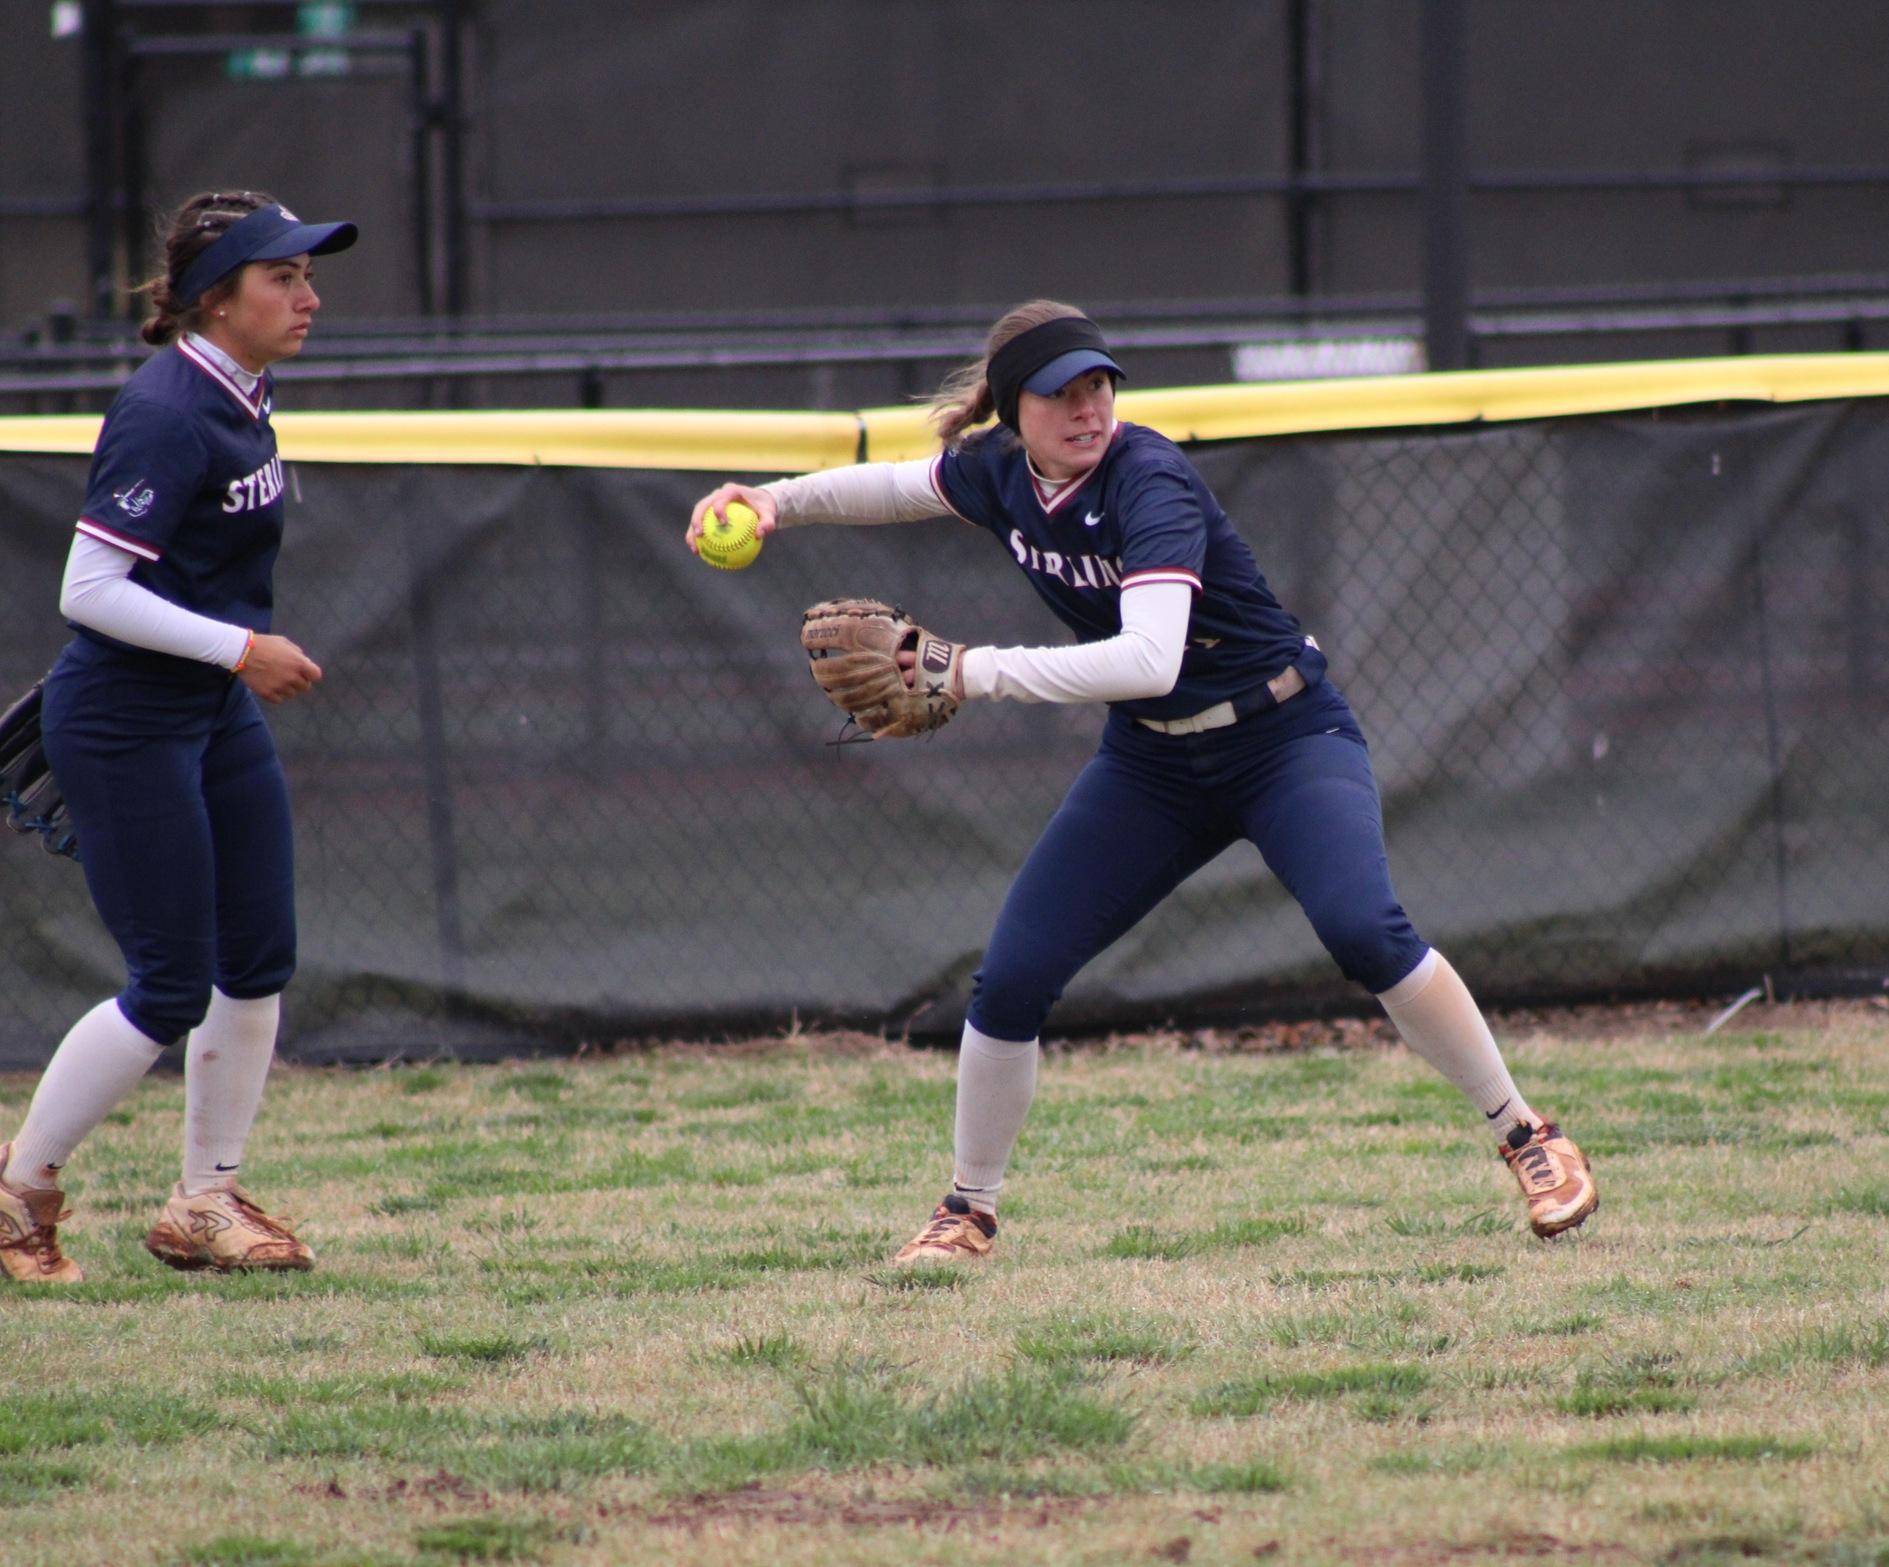 Hillhouse, Warriors End Senior Day with Walk Off Win